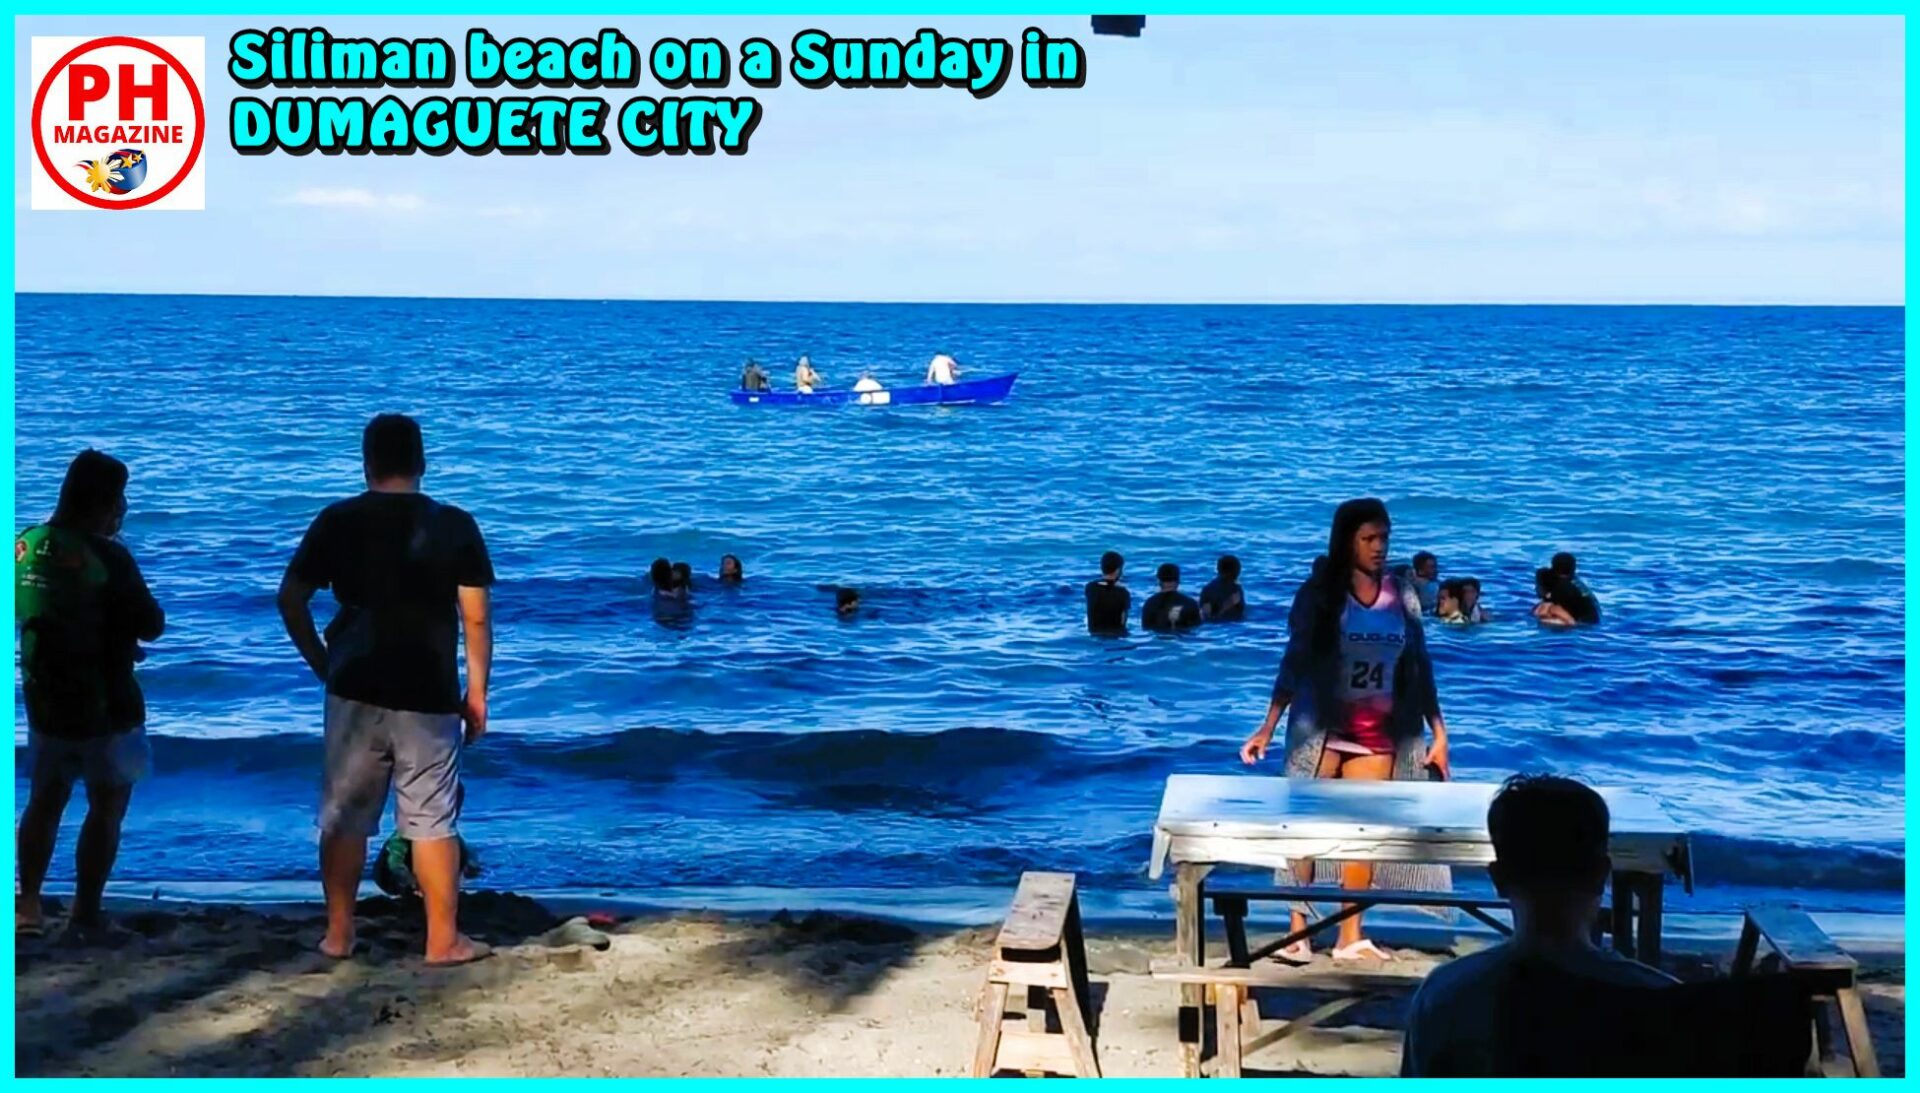 SIGHTS OF NEGROS - PHOTO - Siliman beach on a Sunday in Dumaguete City